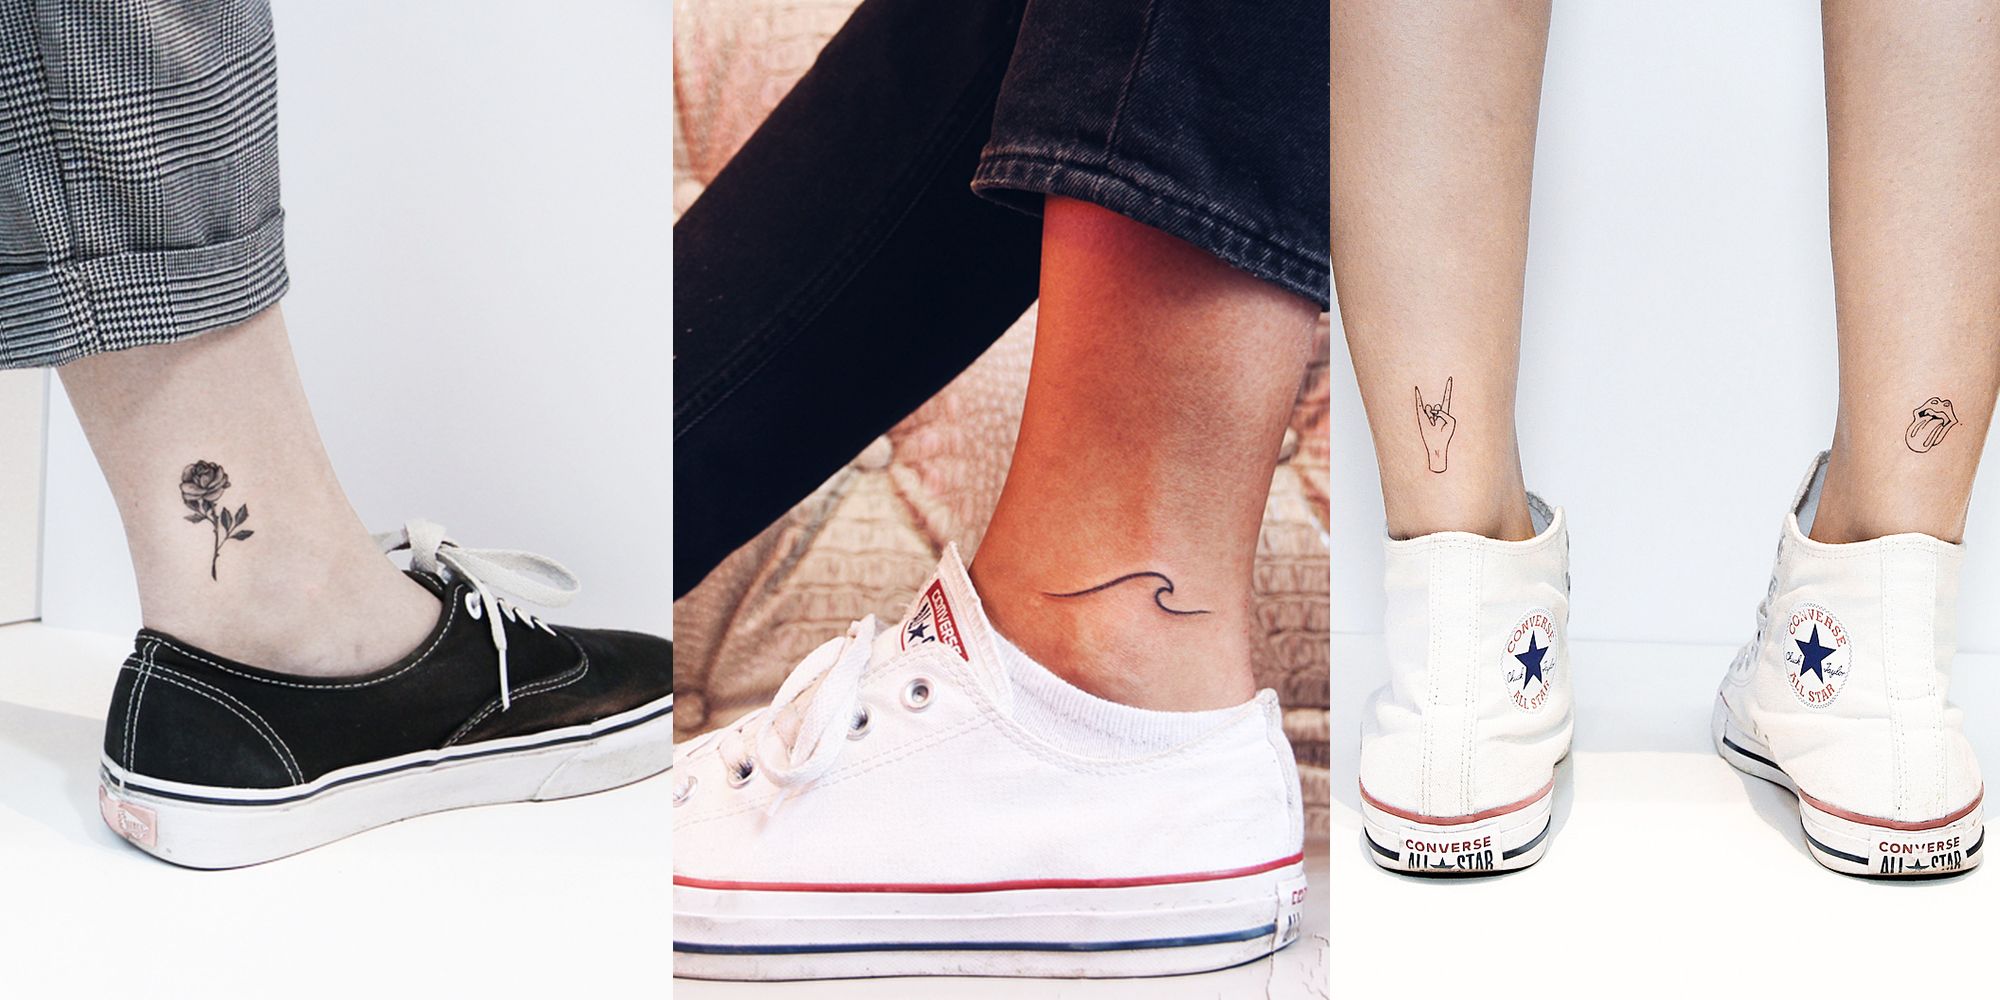 Pixie Geldof's Star Left Ankle Tattoo | Steal Her Style